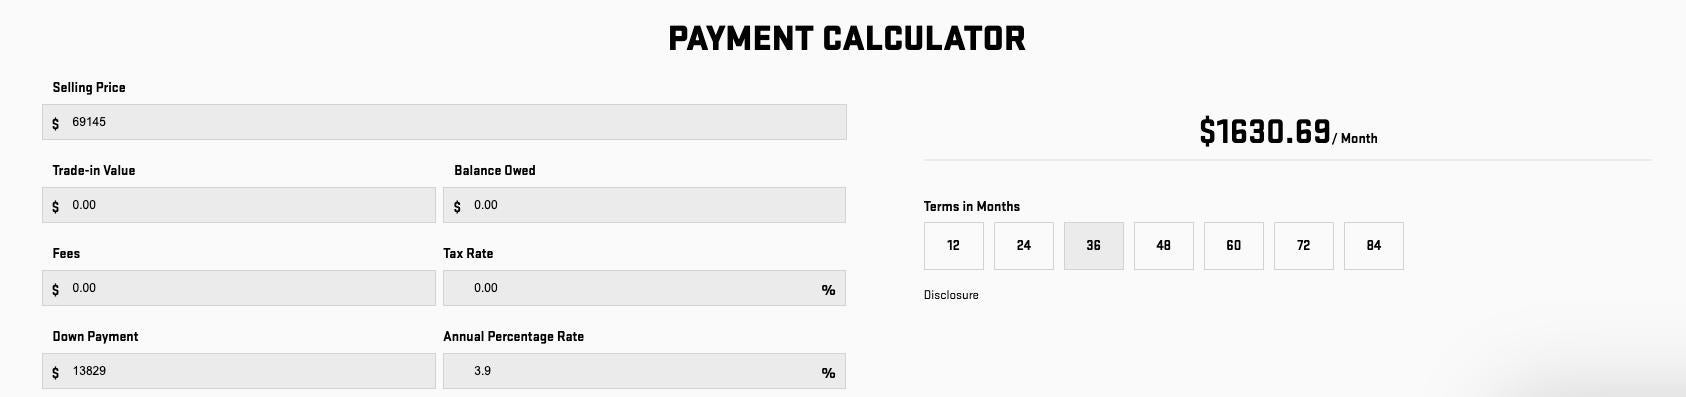 Payment Calculator on our Website | Lupient Chevrolet in Bloomington MN